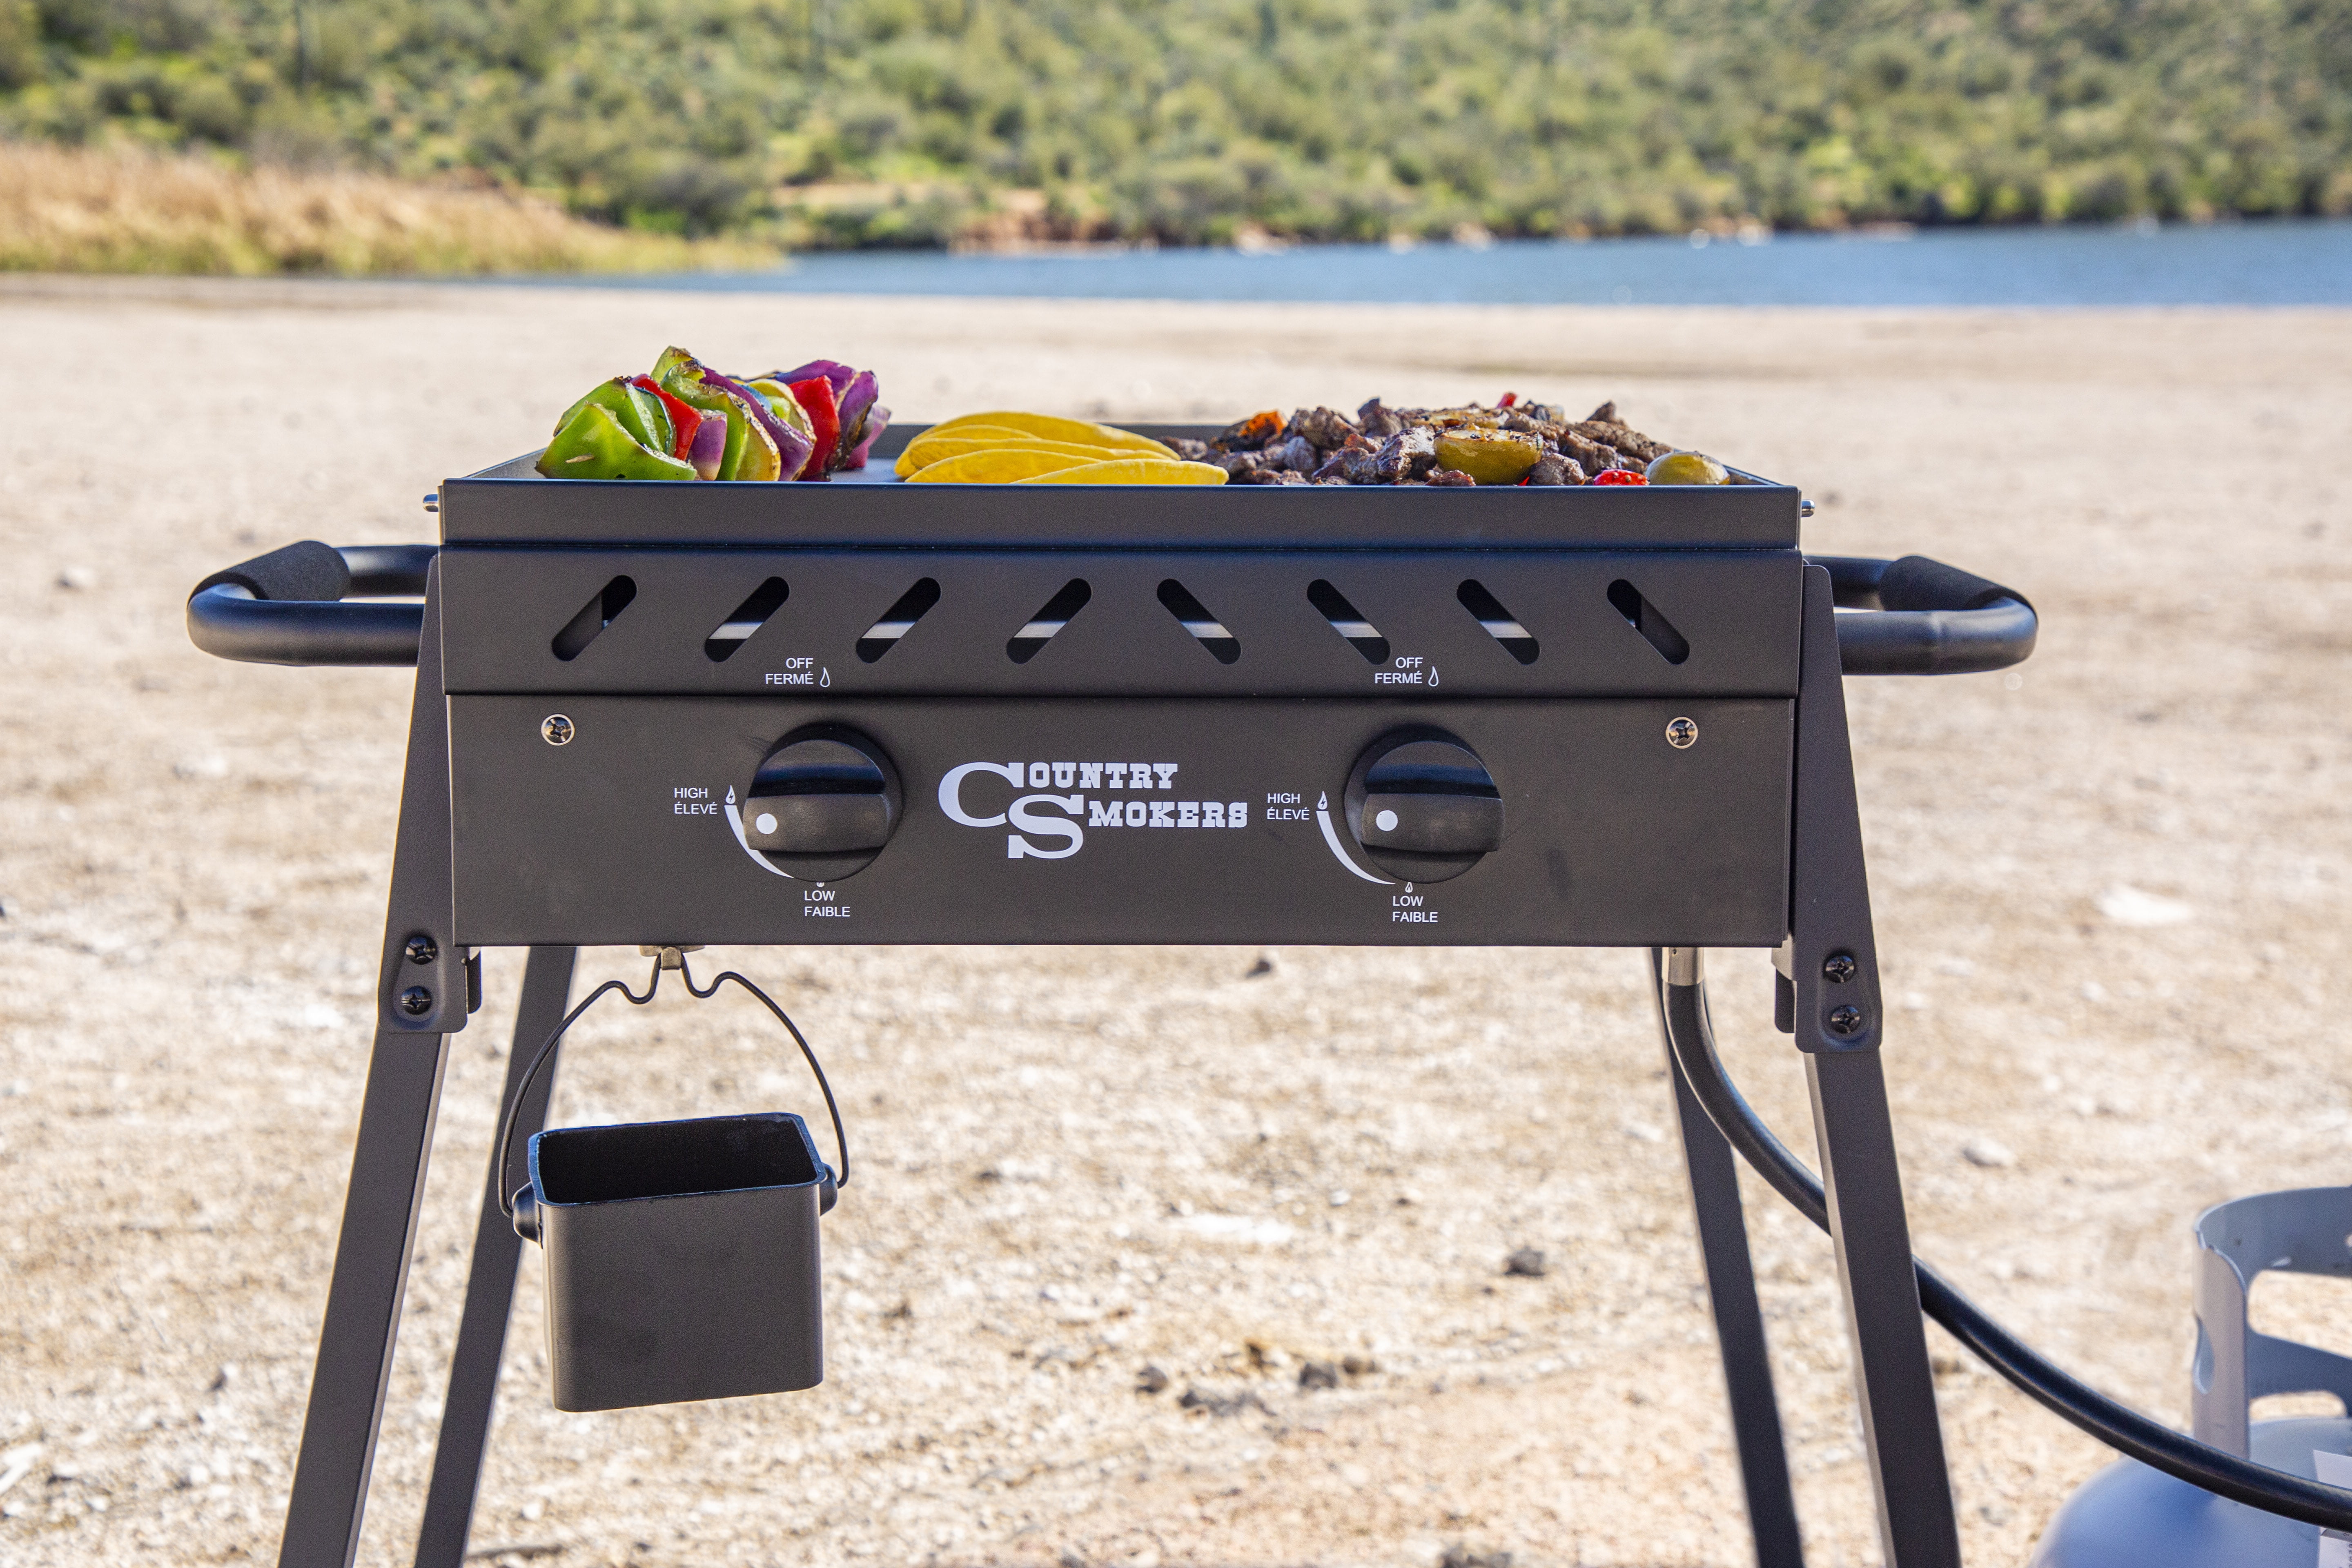 Country Smokers 2 Burner Portable Griddle The Plains Horizon Series 373 Sq In Cooking Space Walmart Com Walmart Com